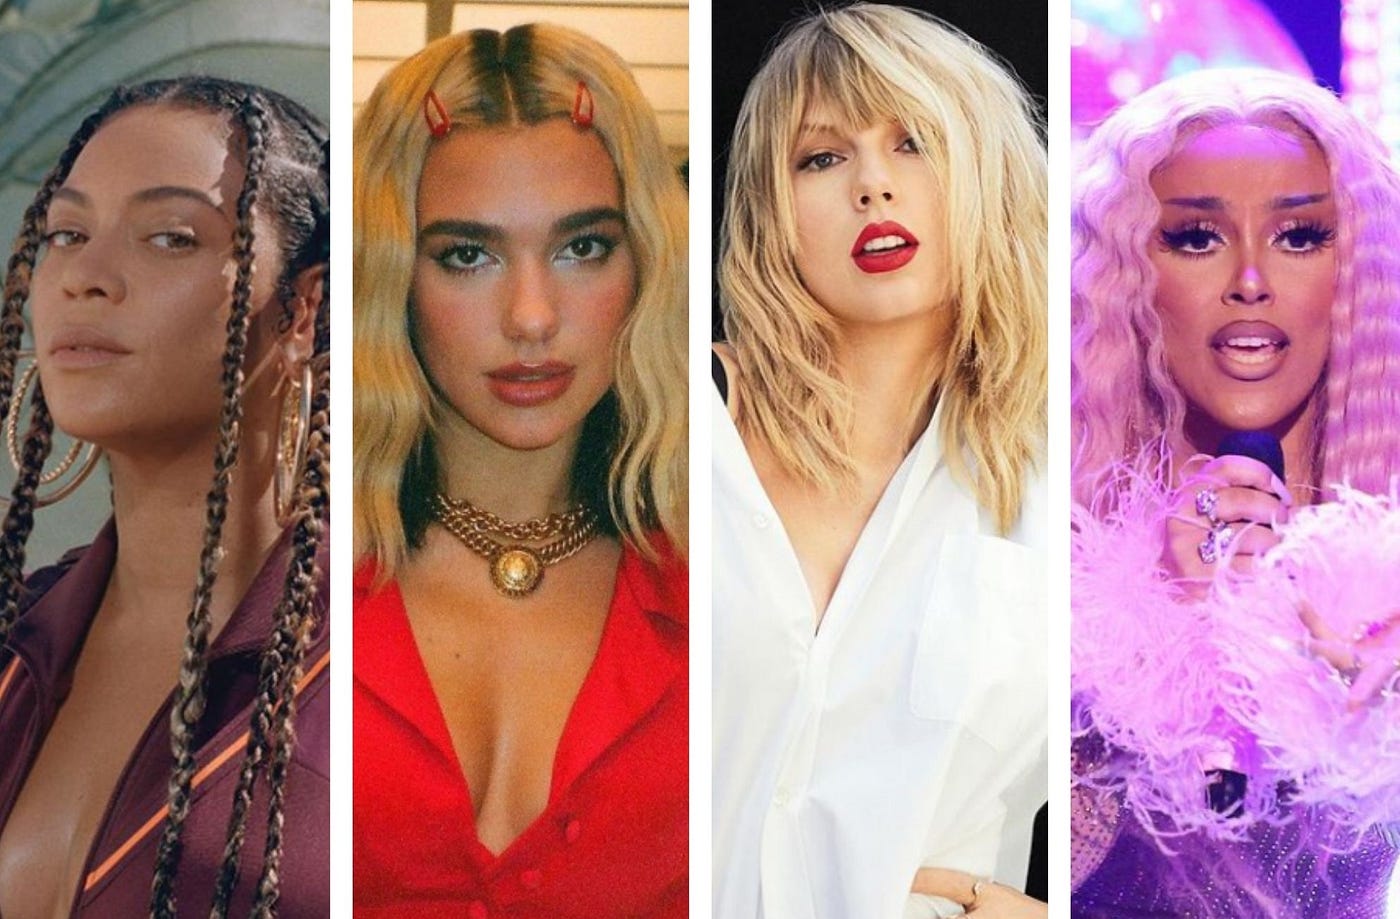 Grammys 2021: Taylor Swift, Billie Eilish and More Top Looks